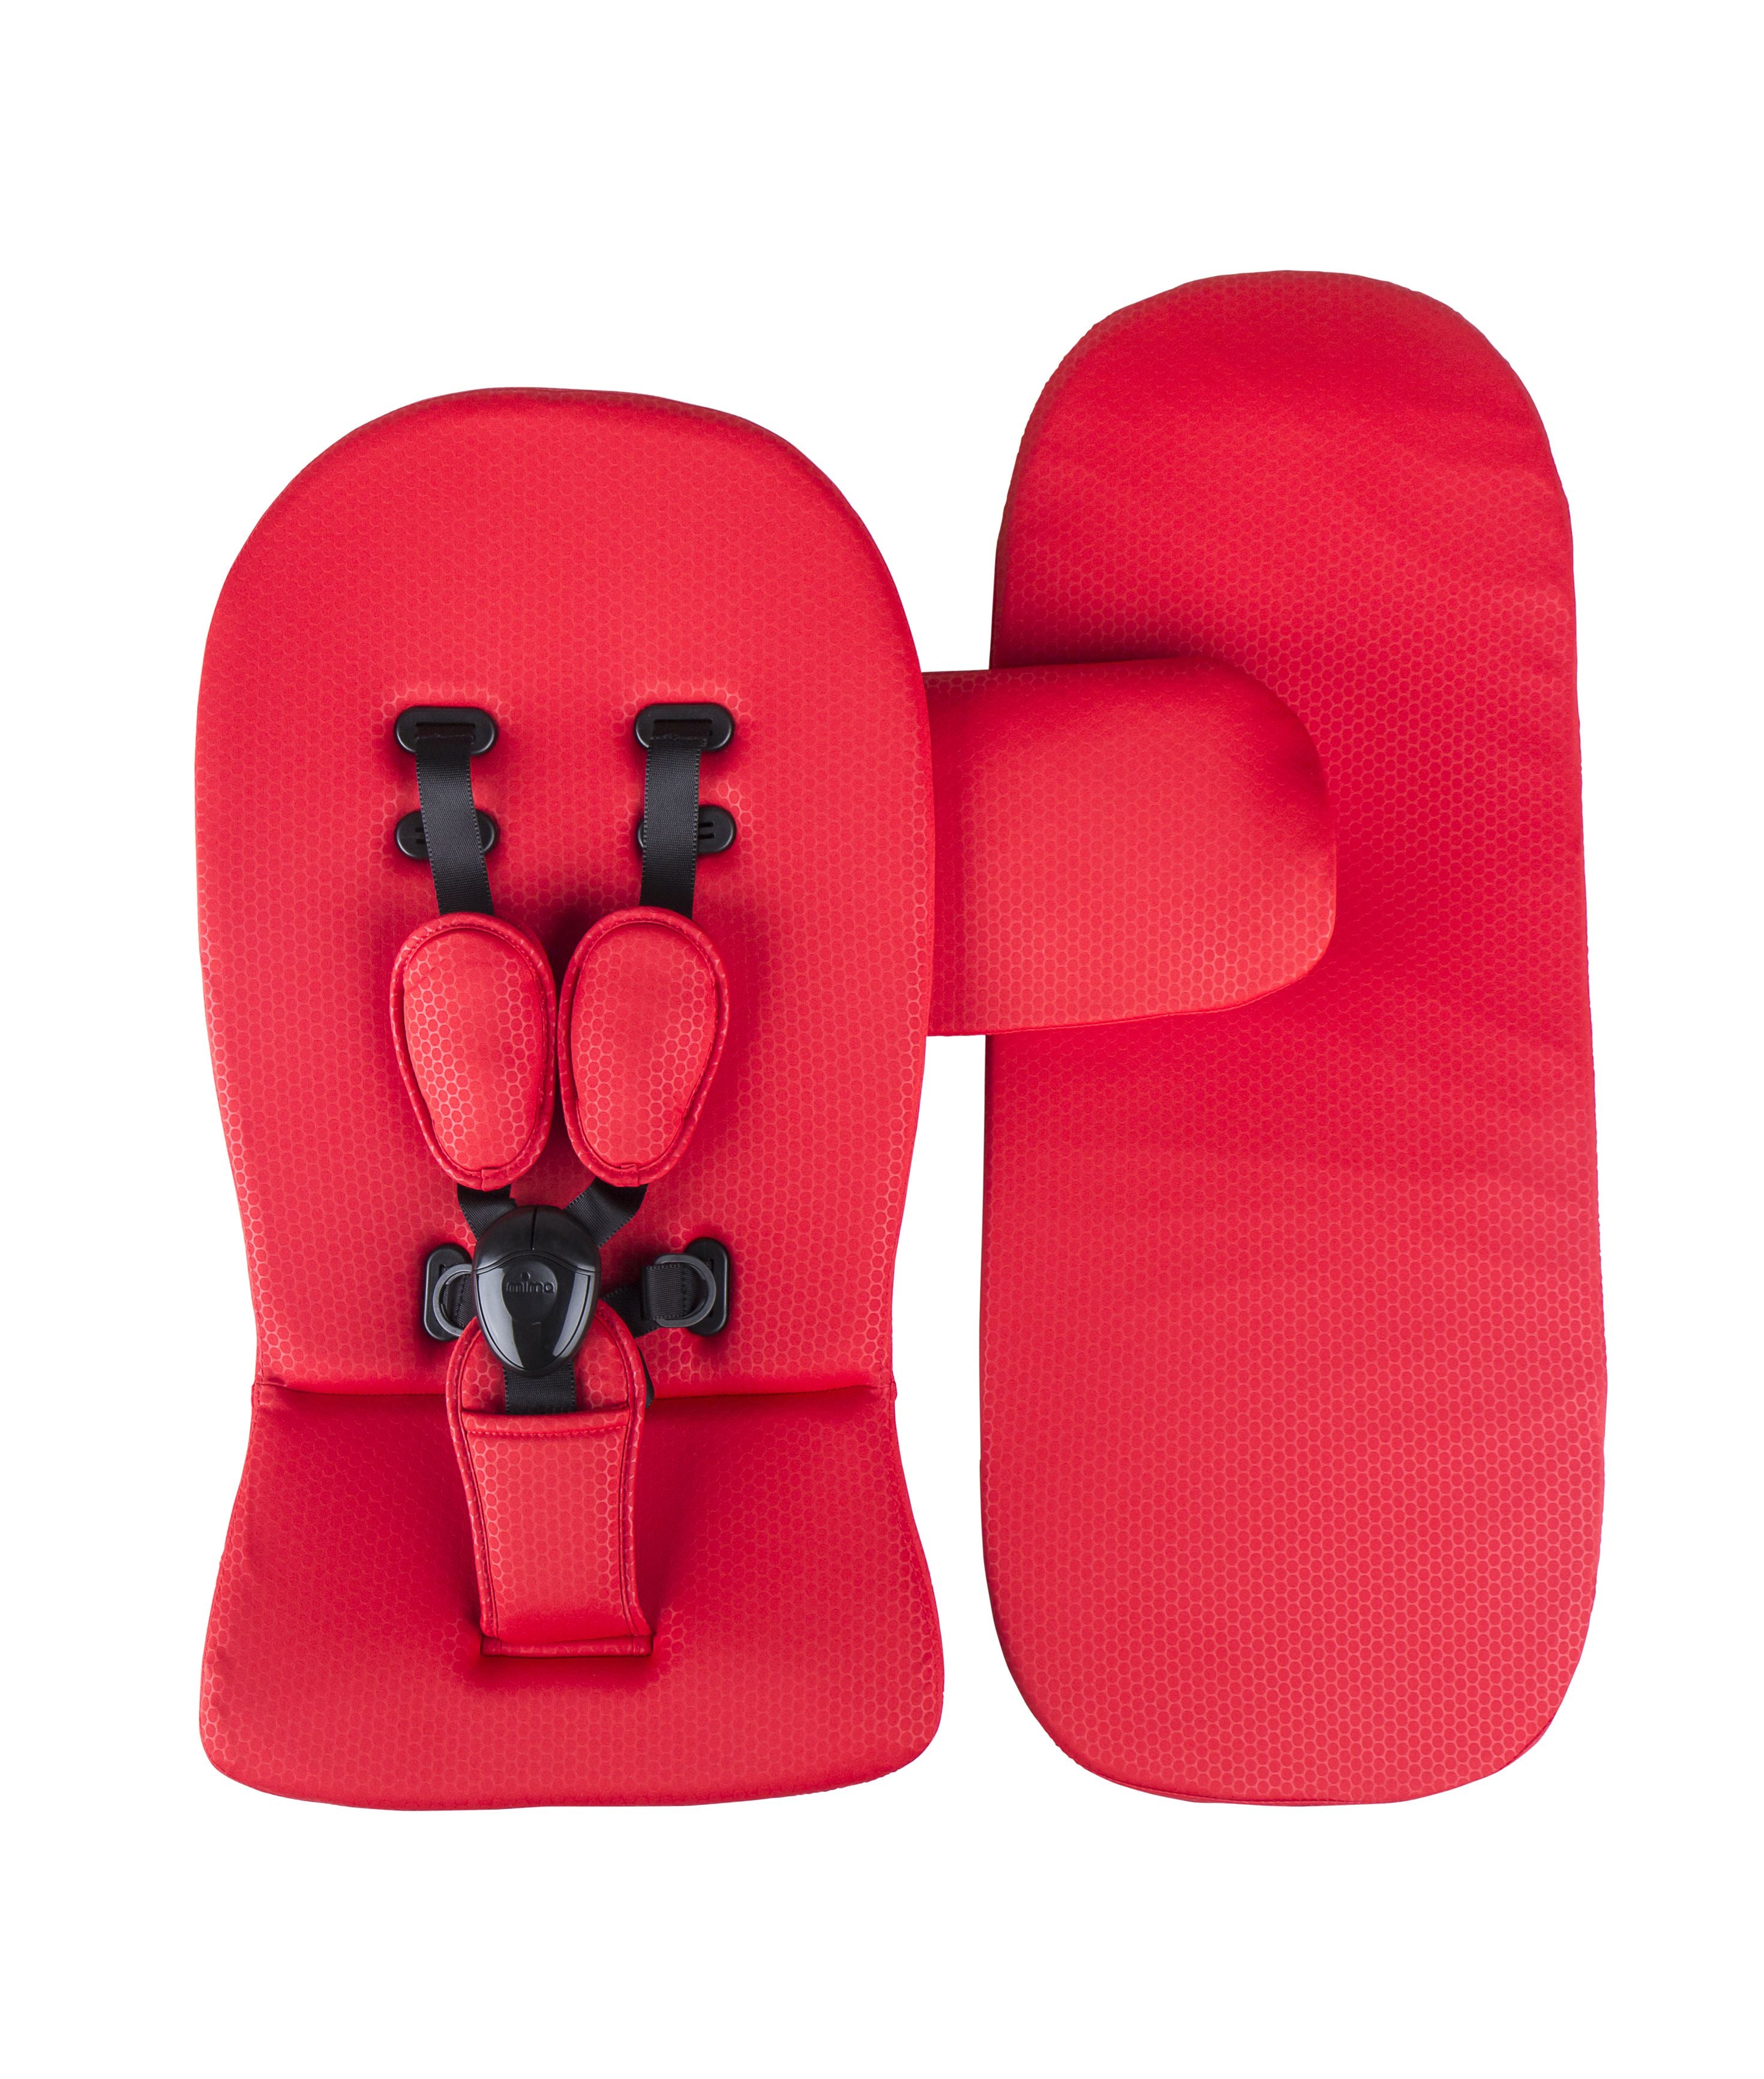 Mima Cushion Kit (Starter Pack) - Ruby Red